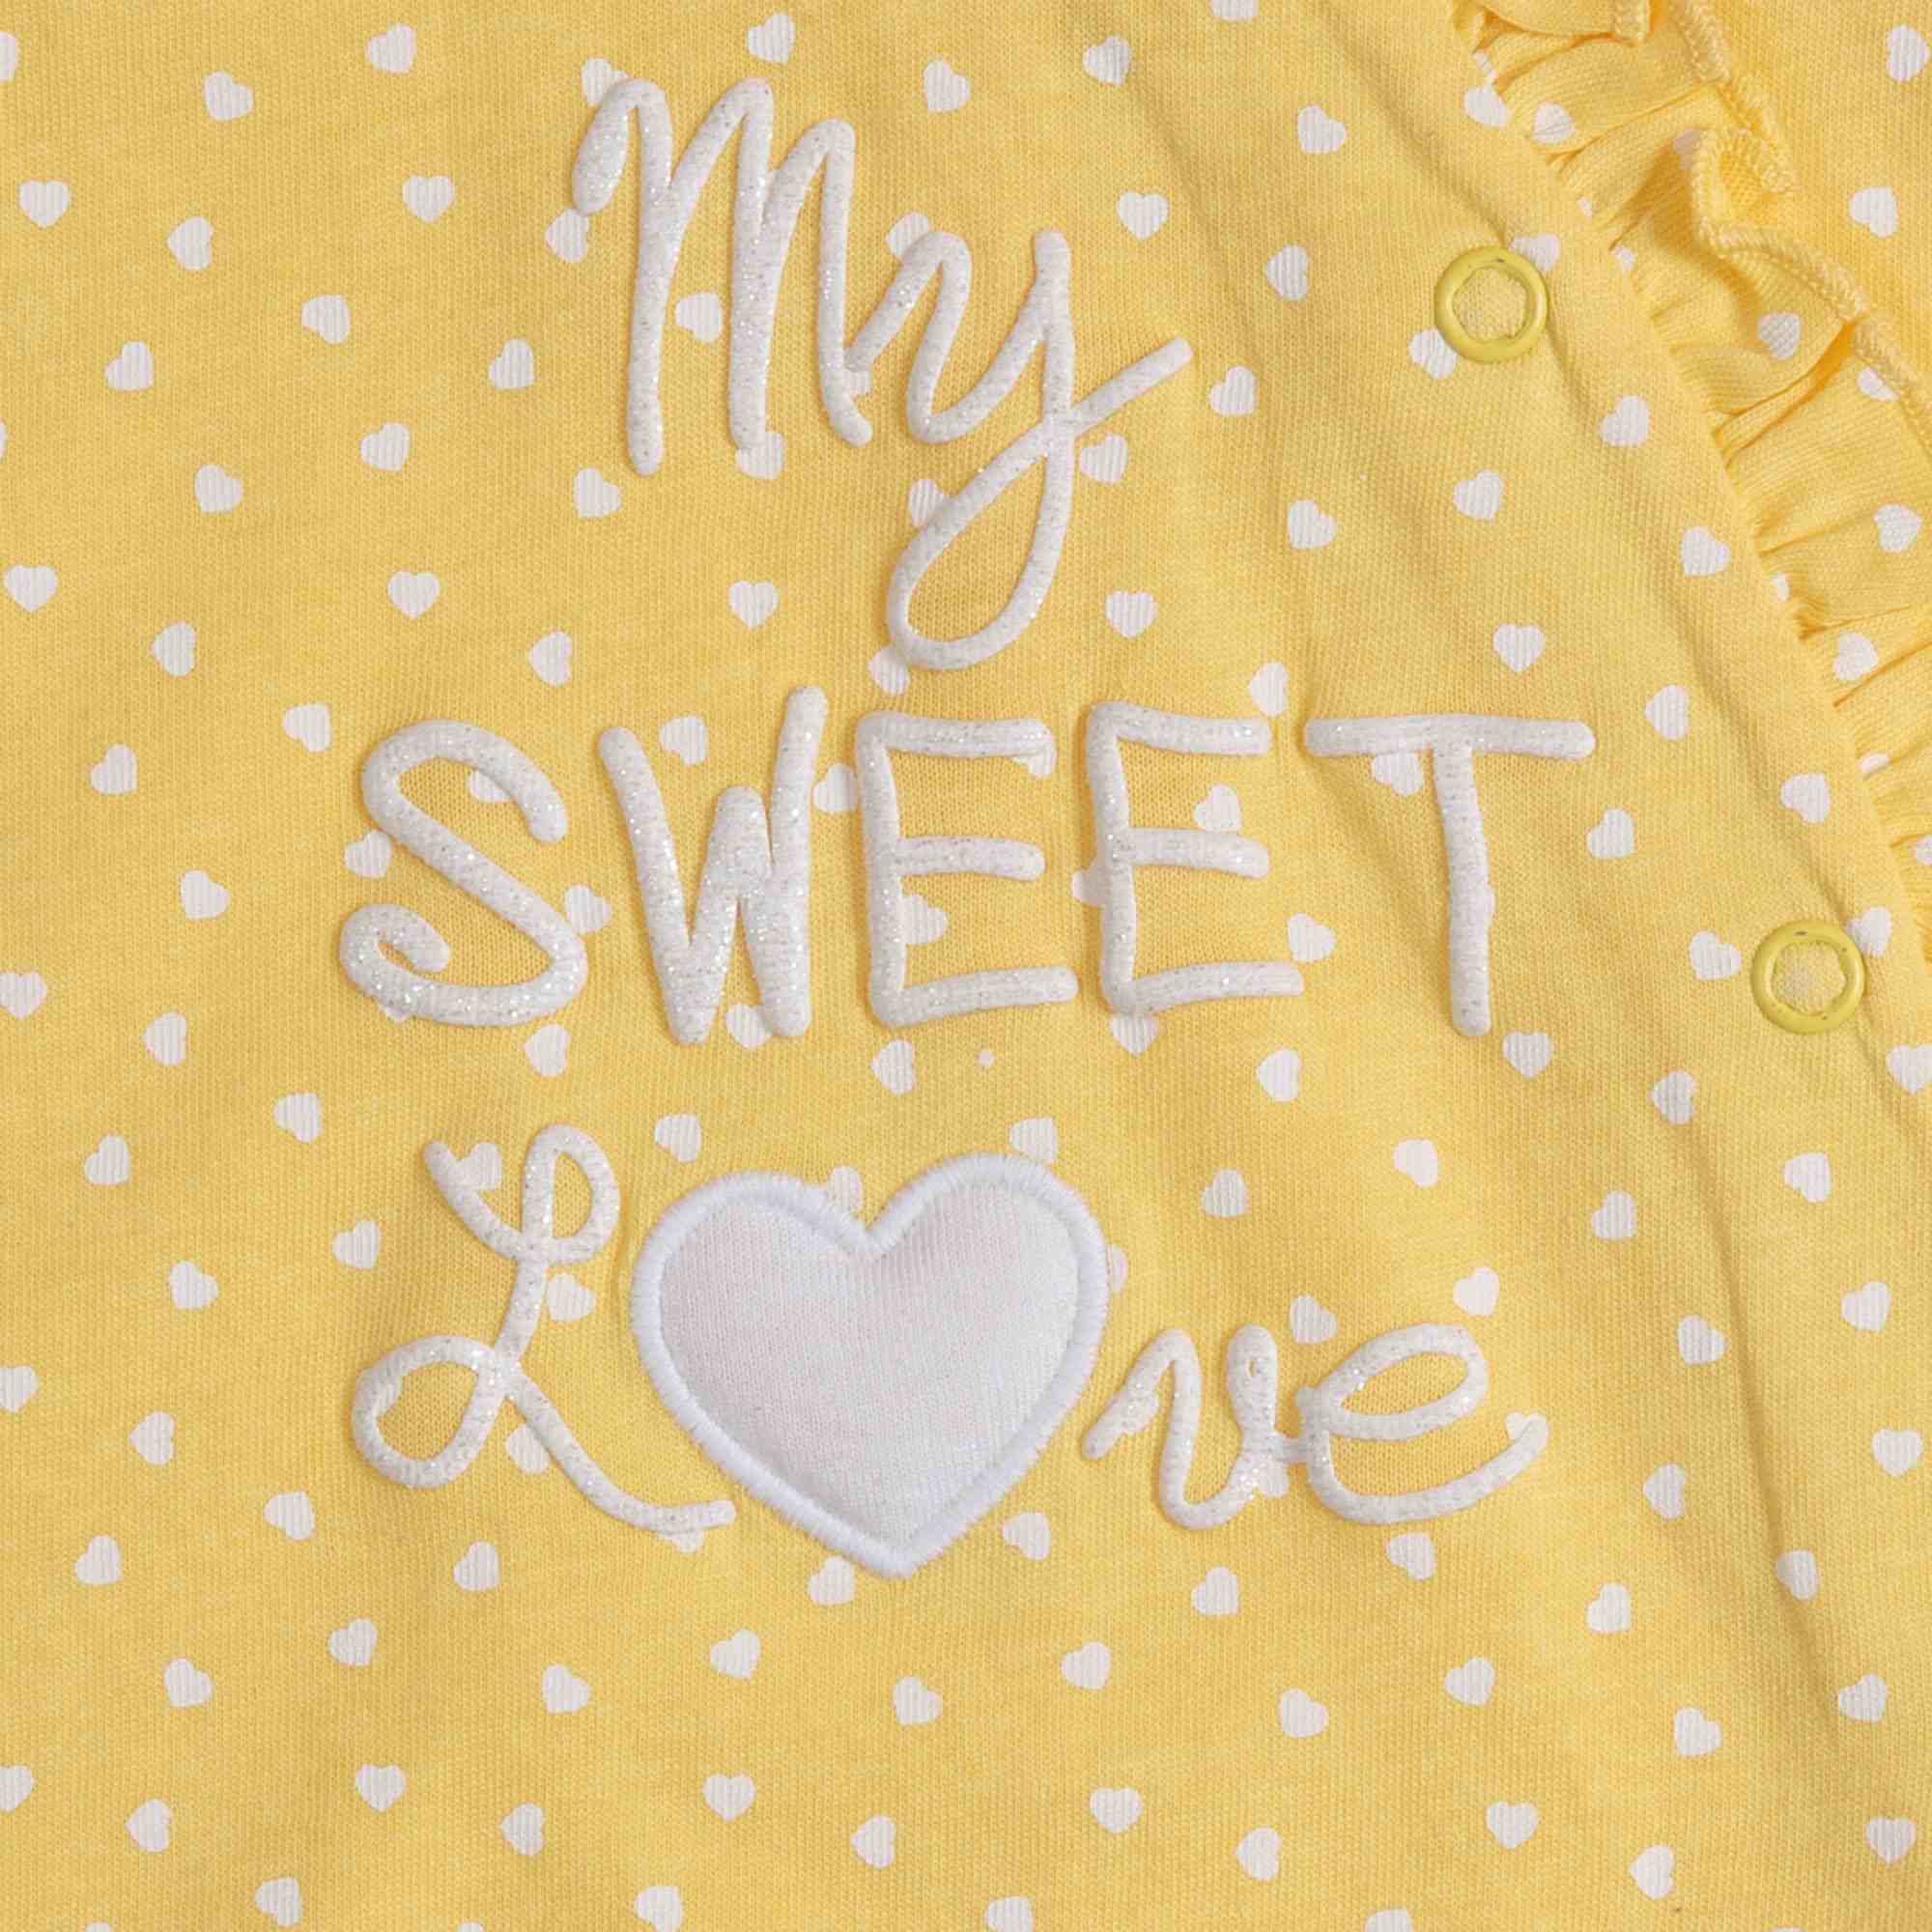 Mawi pagliaccetto giallo sweet love - Mawi